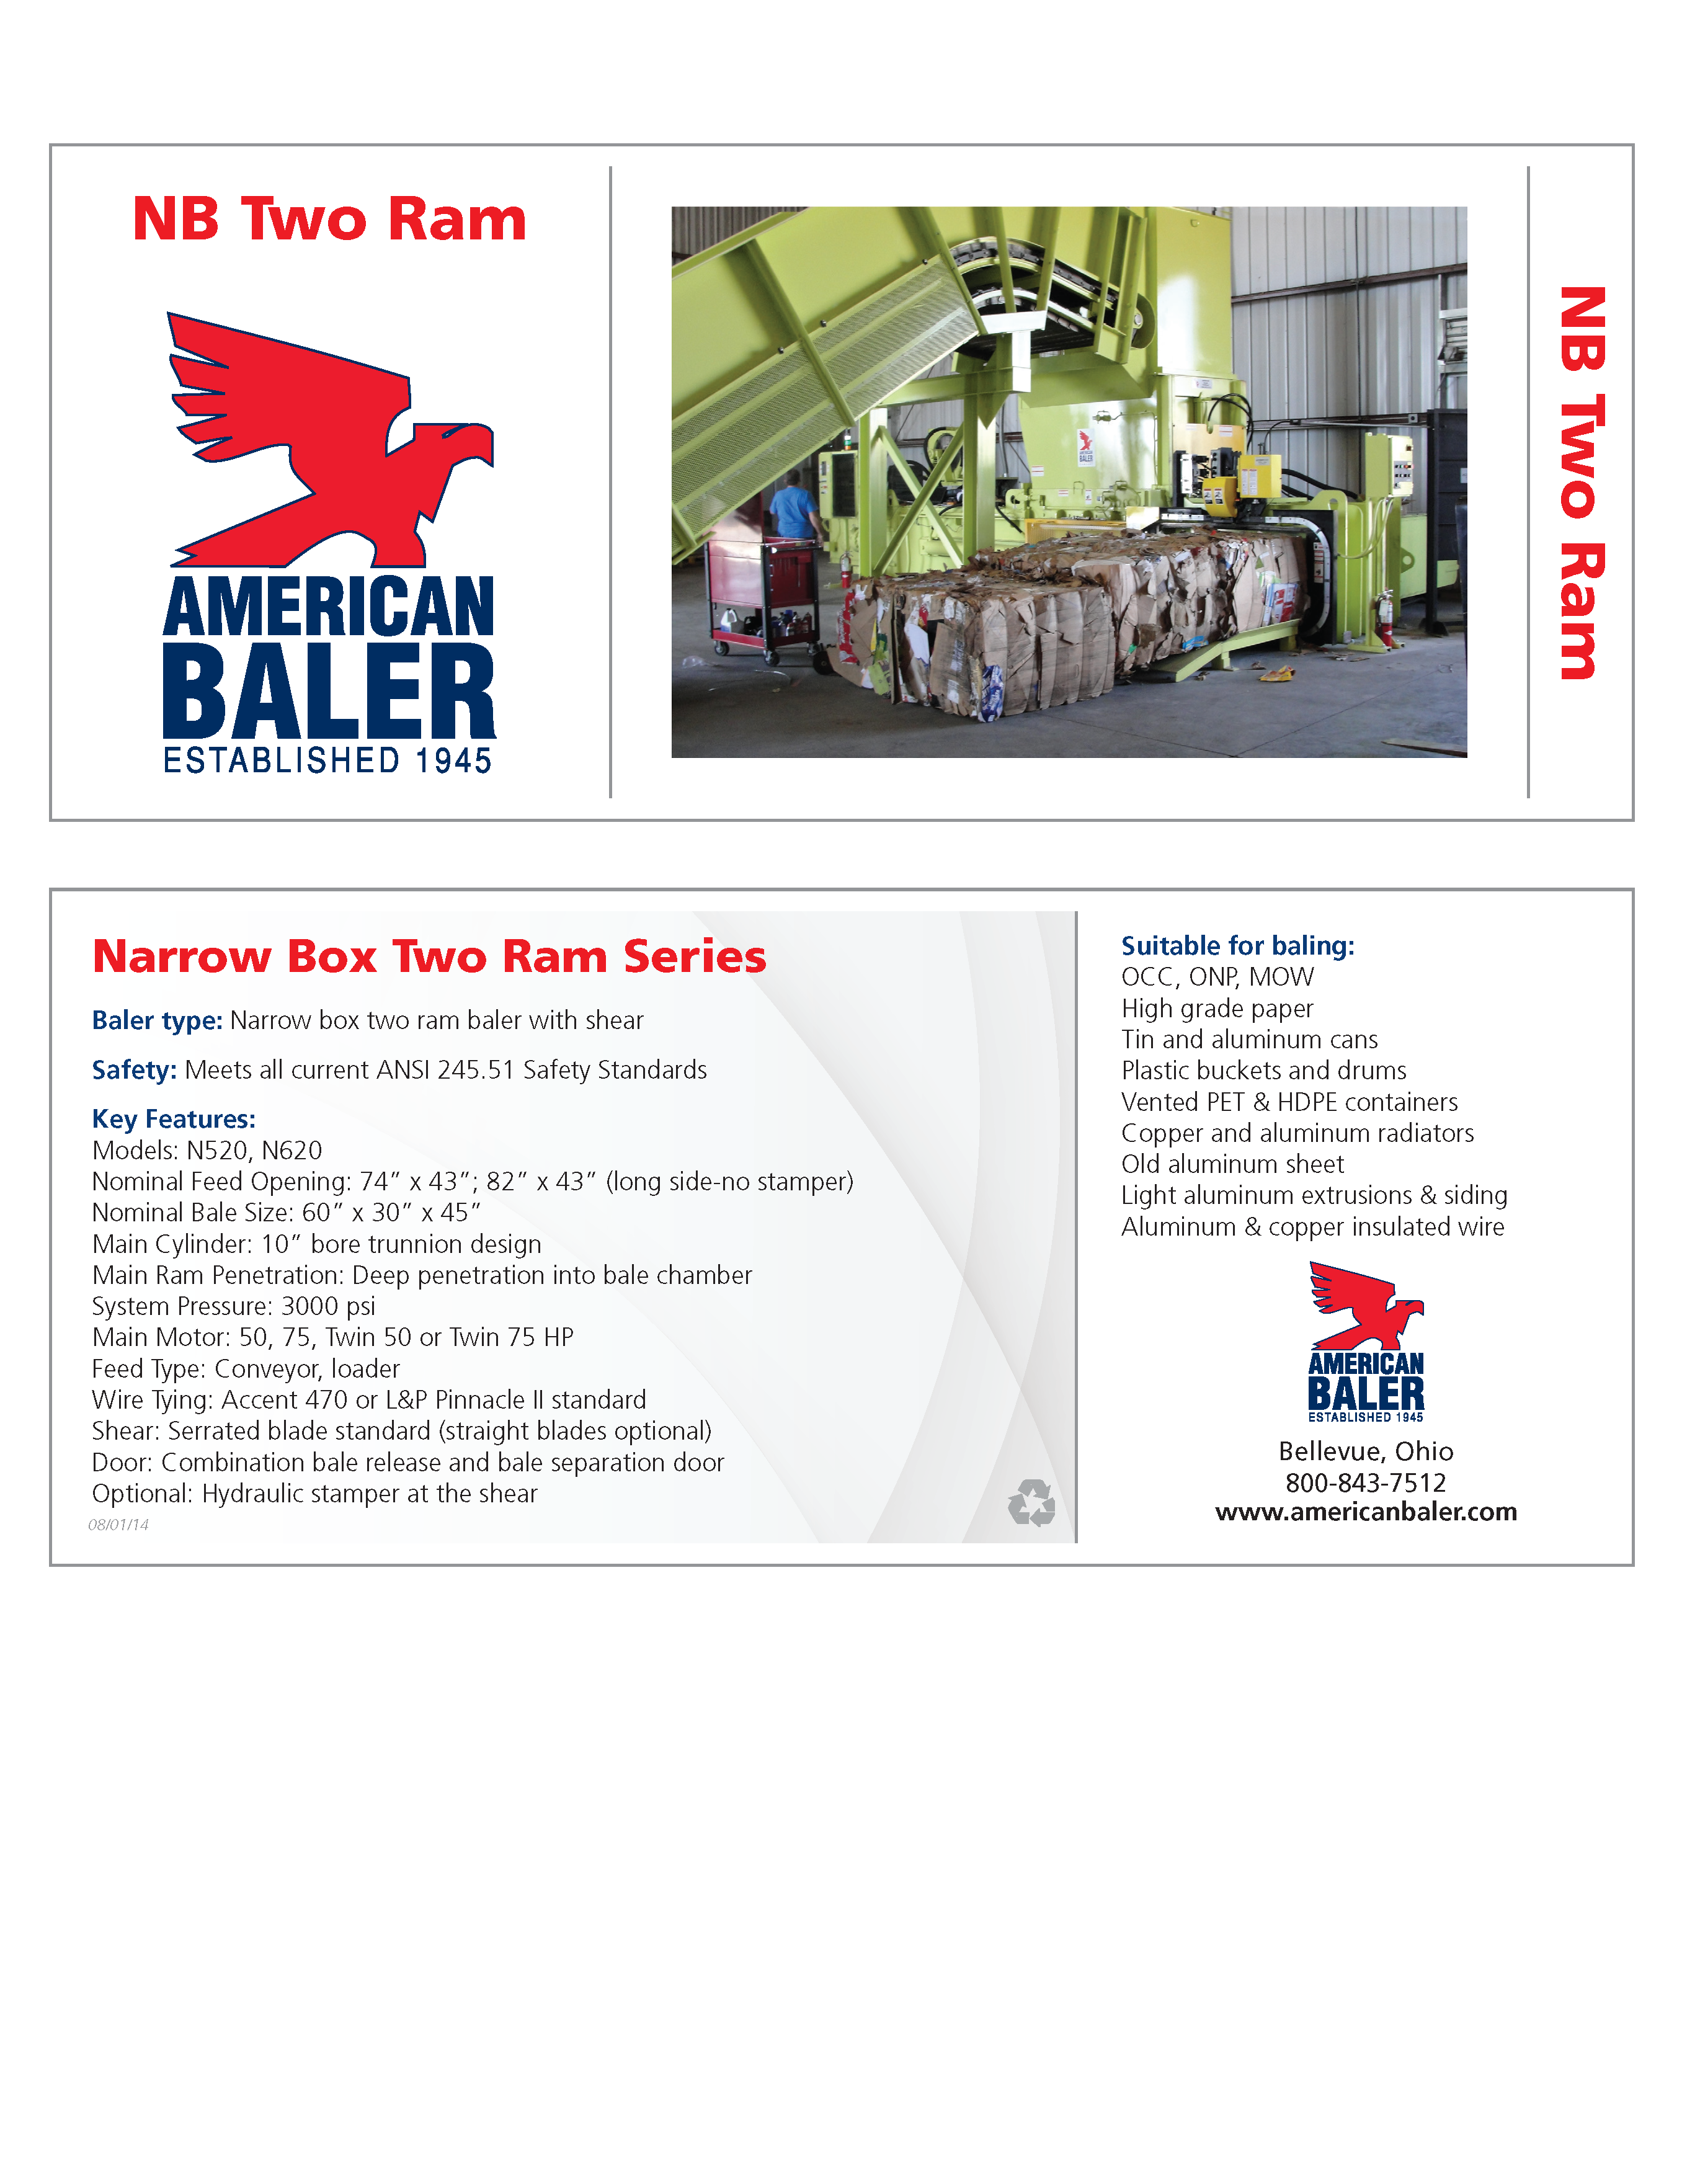 Learn more about the NB Two Ram Baler in the American Baler Brochure: